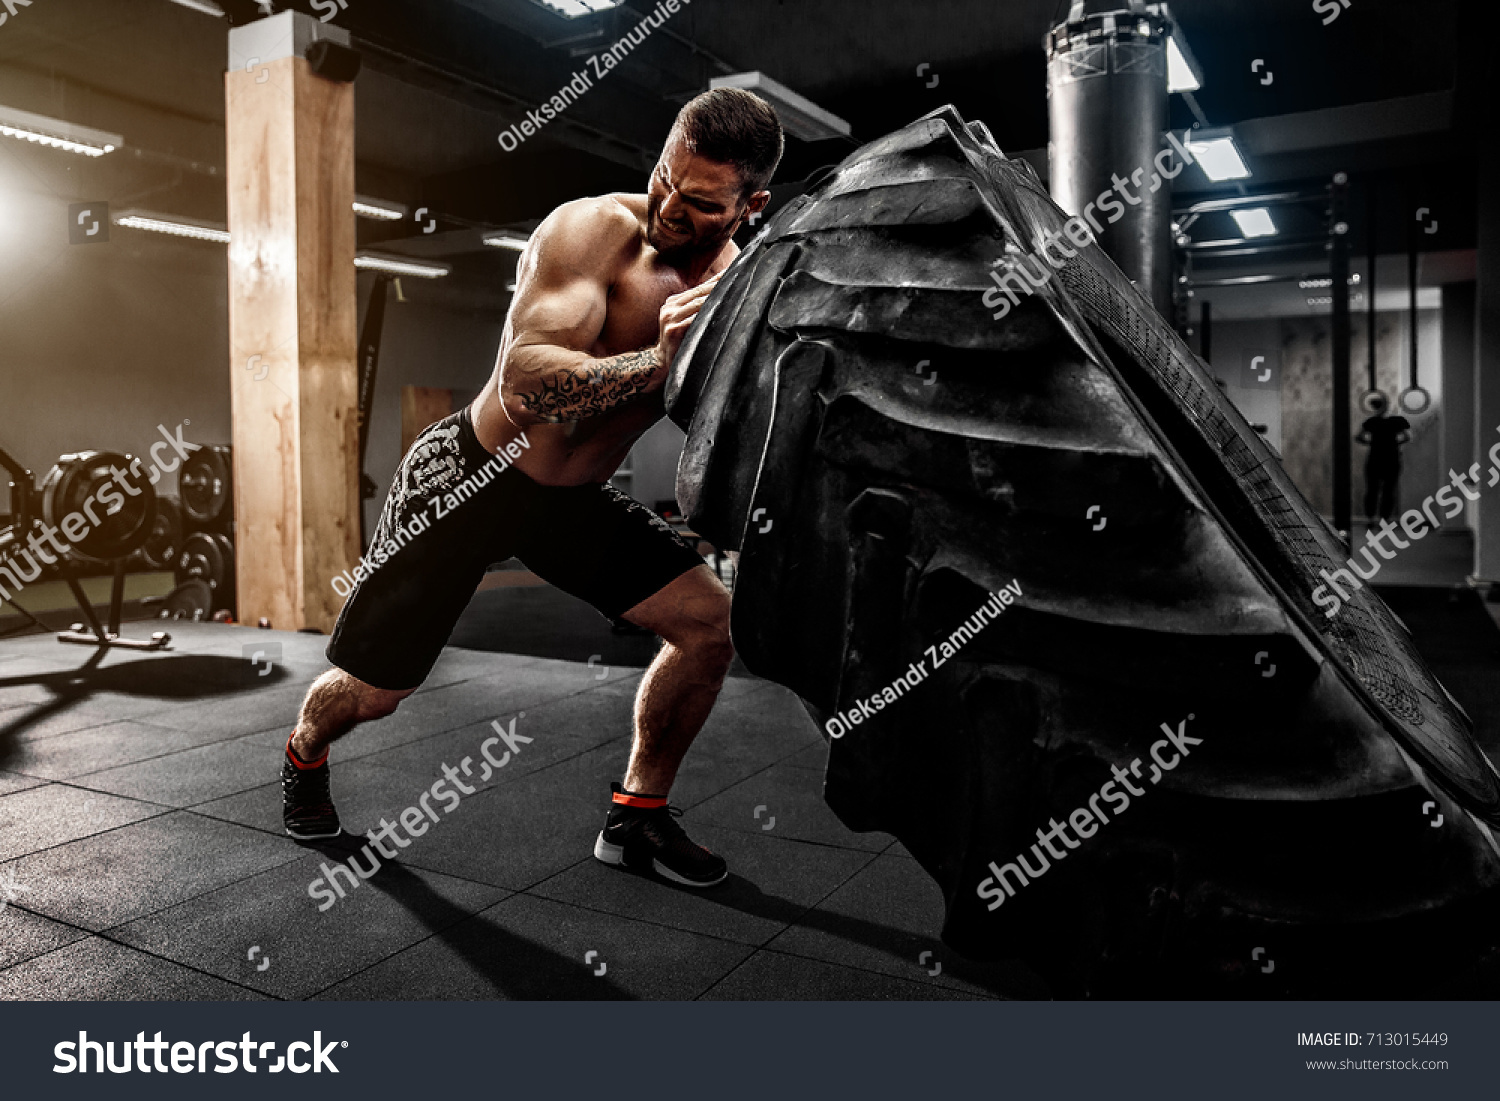 Shirtless man flipping heavy tire at gym #713015449